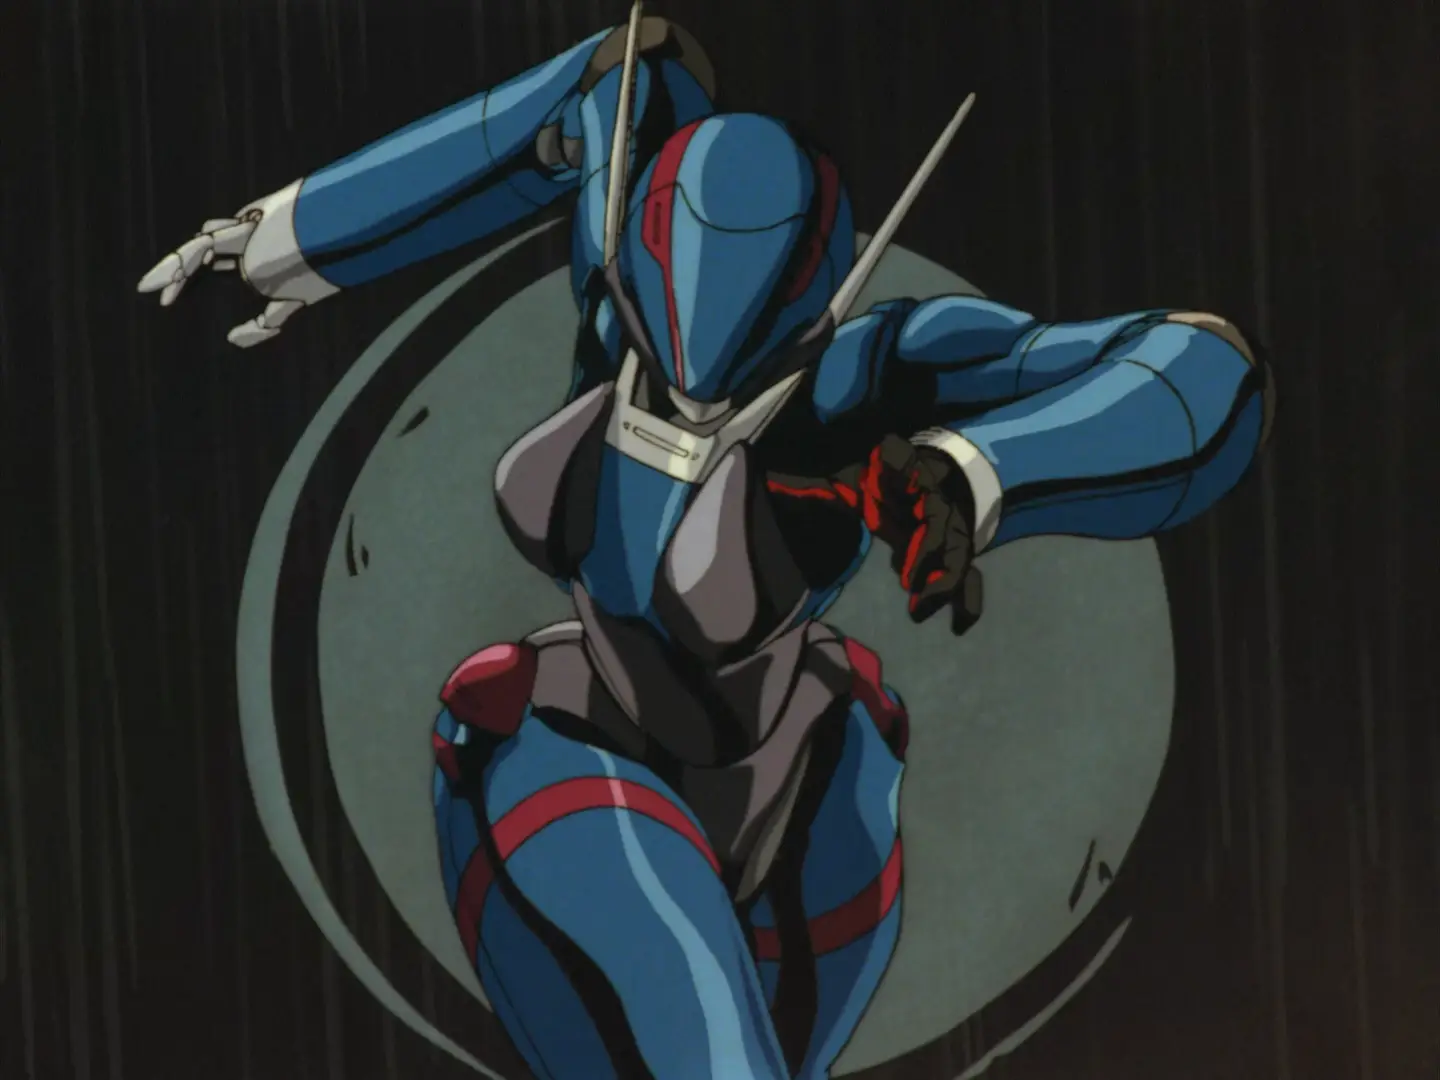 Still from Bubblegum Crisis showing one of the Knight Sabers running forwards in her suit. The suit is blue with red and white accents; it has molded structures over the breasts. The helmet fully covers the face and slightly resembles a motorbike helmet.